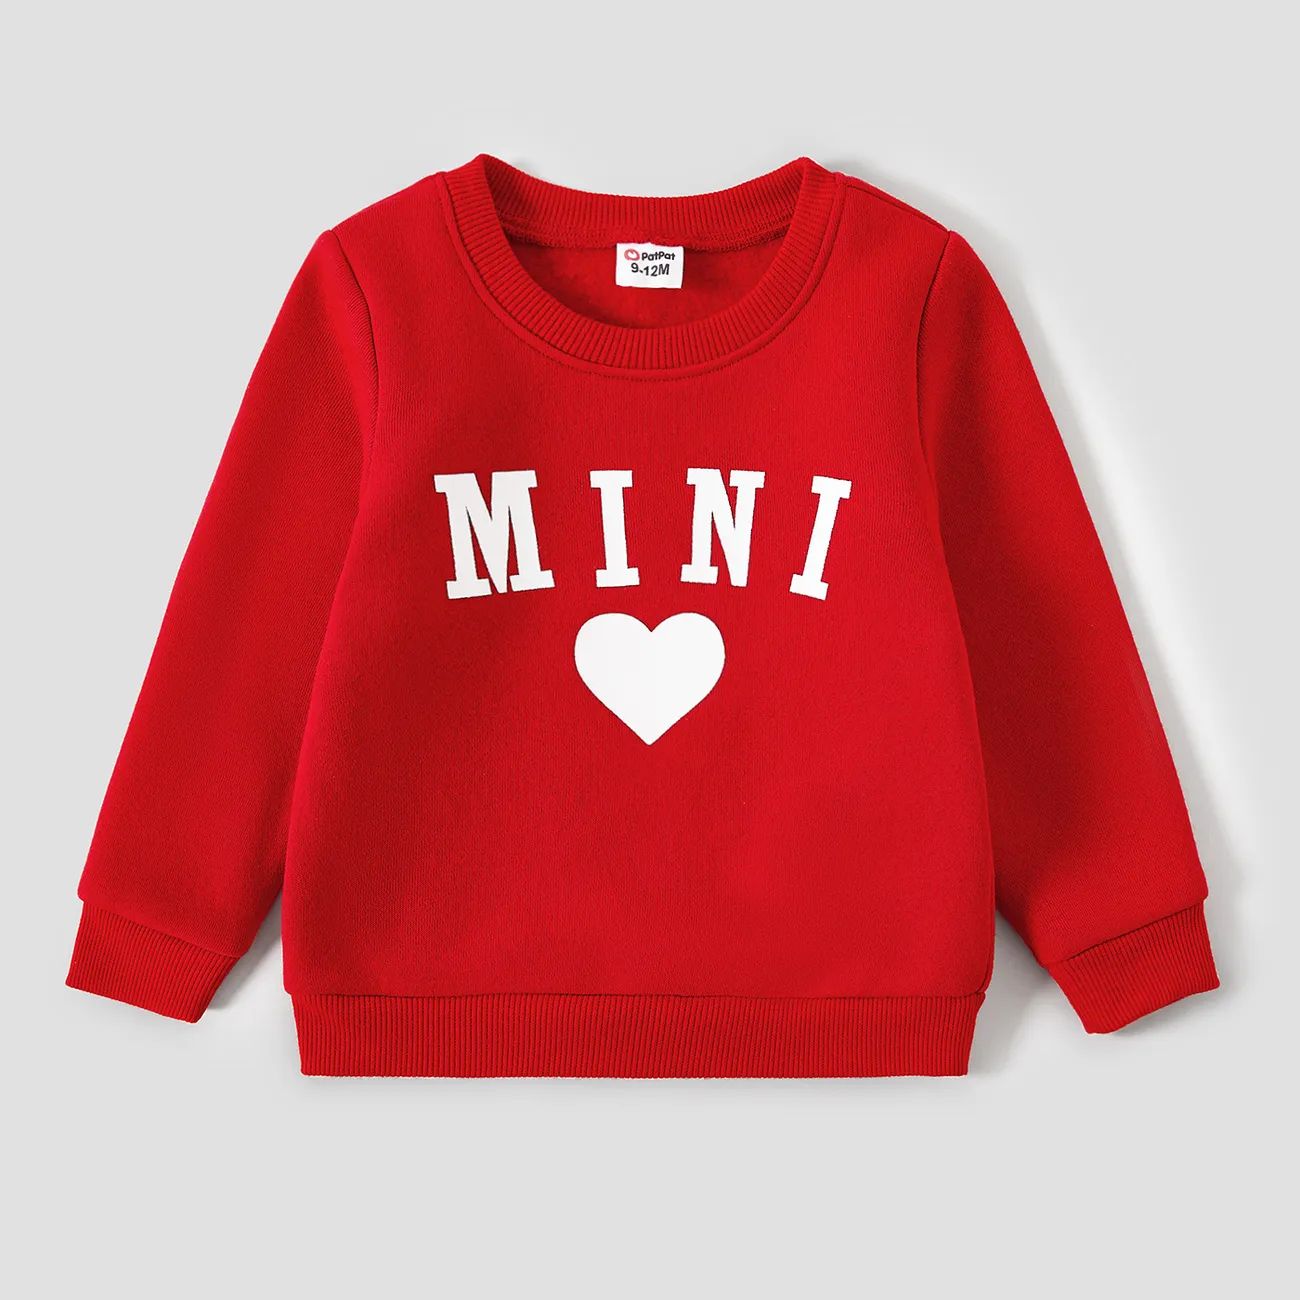 Mommy and Me Solid Letters & Love Print Long-sleeve Tops Only $9.34 PatPat US | PatPat